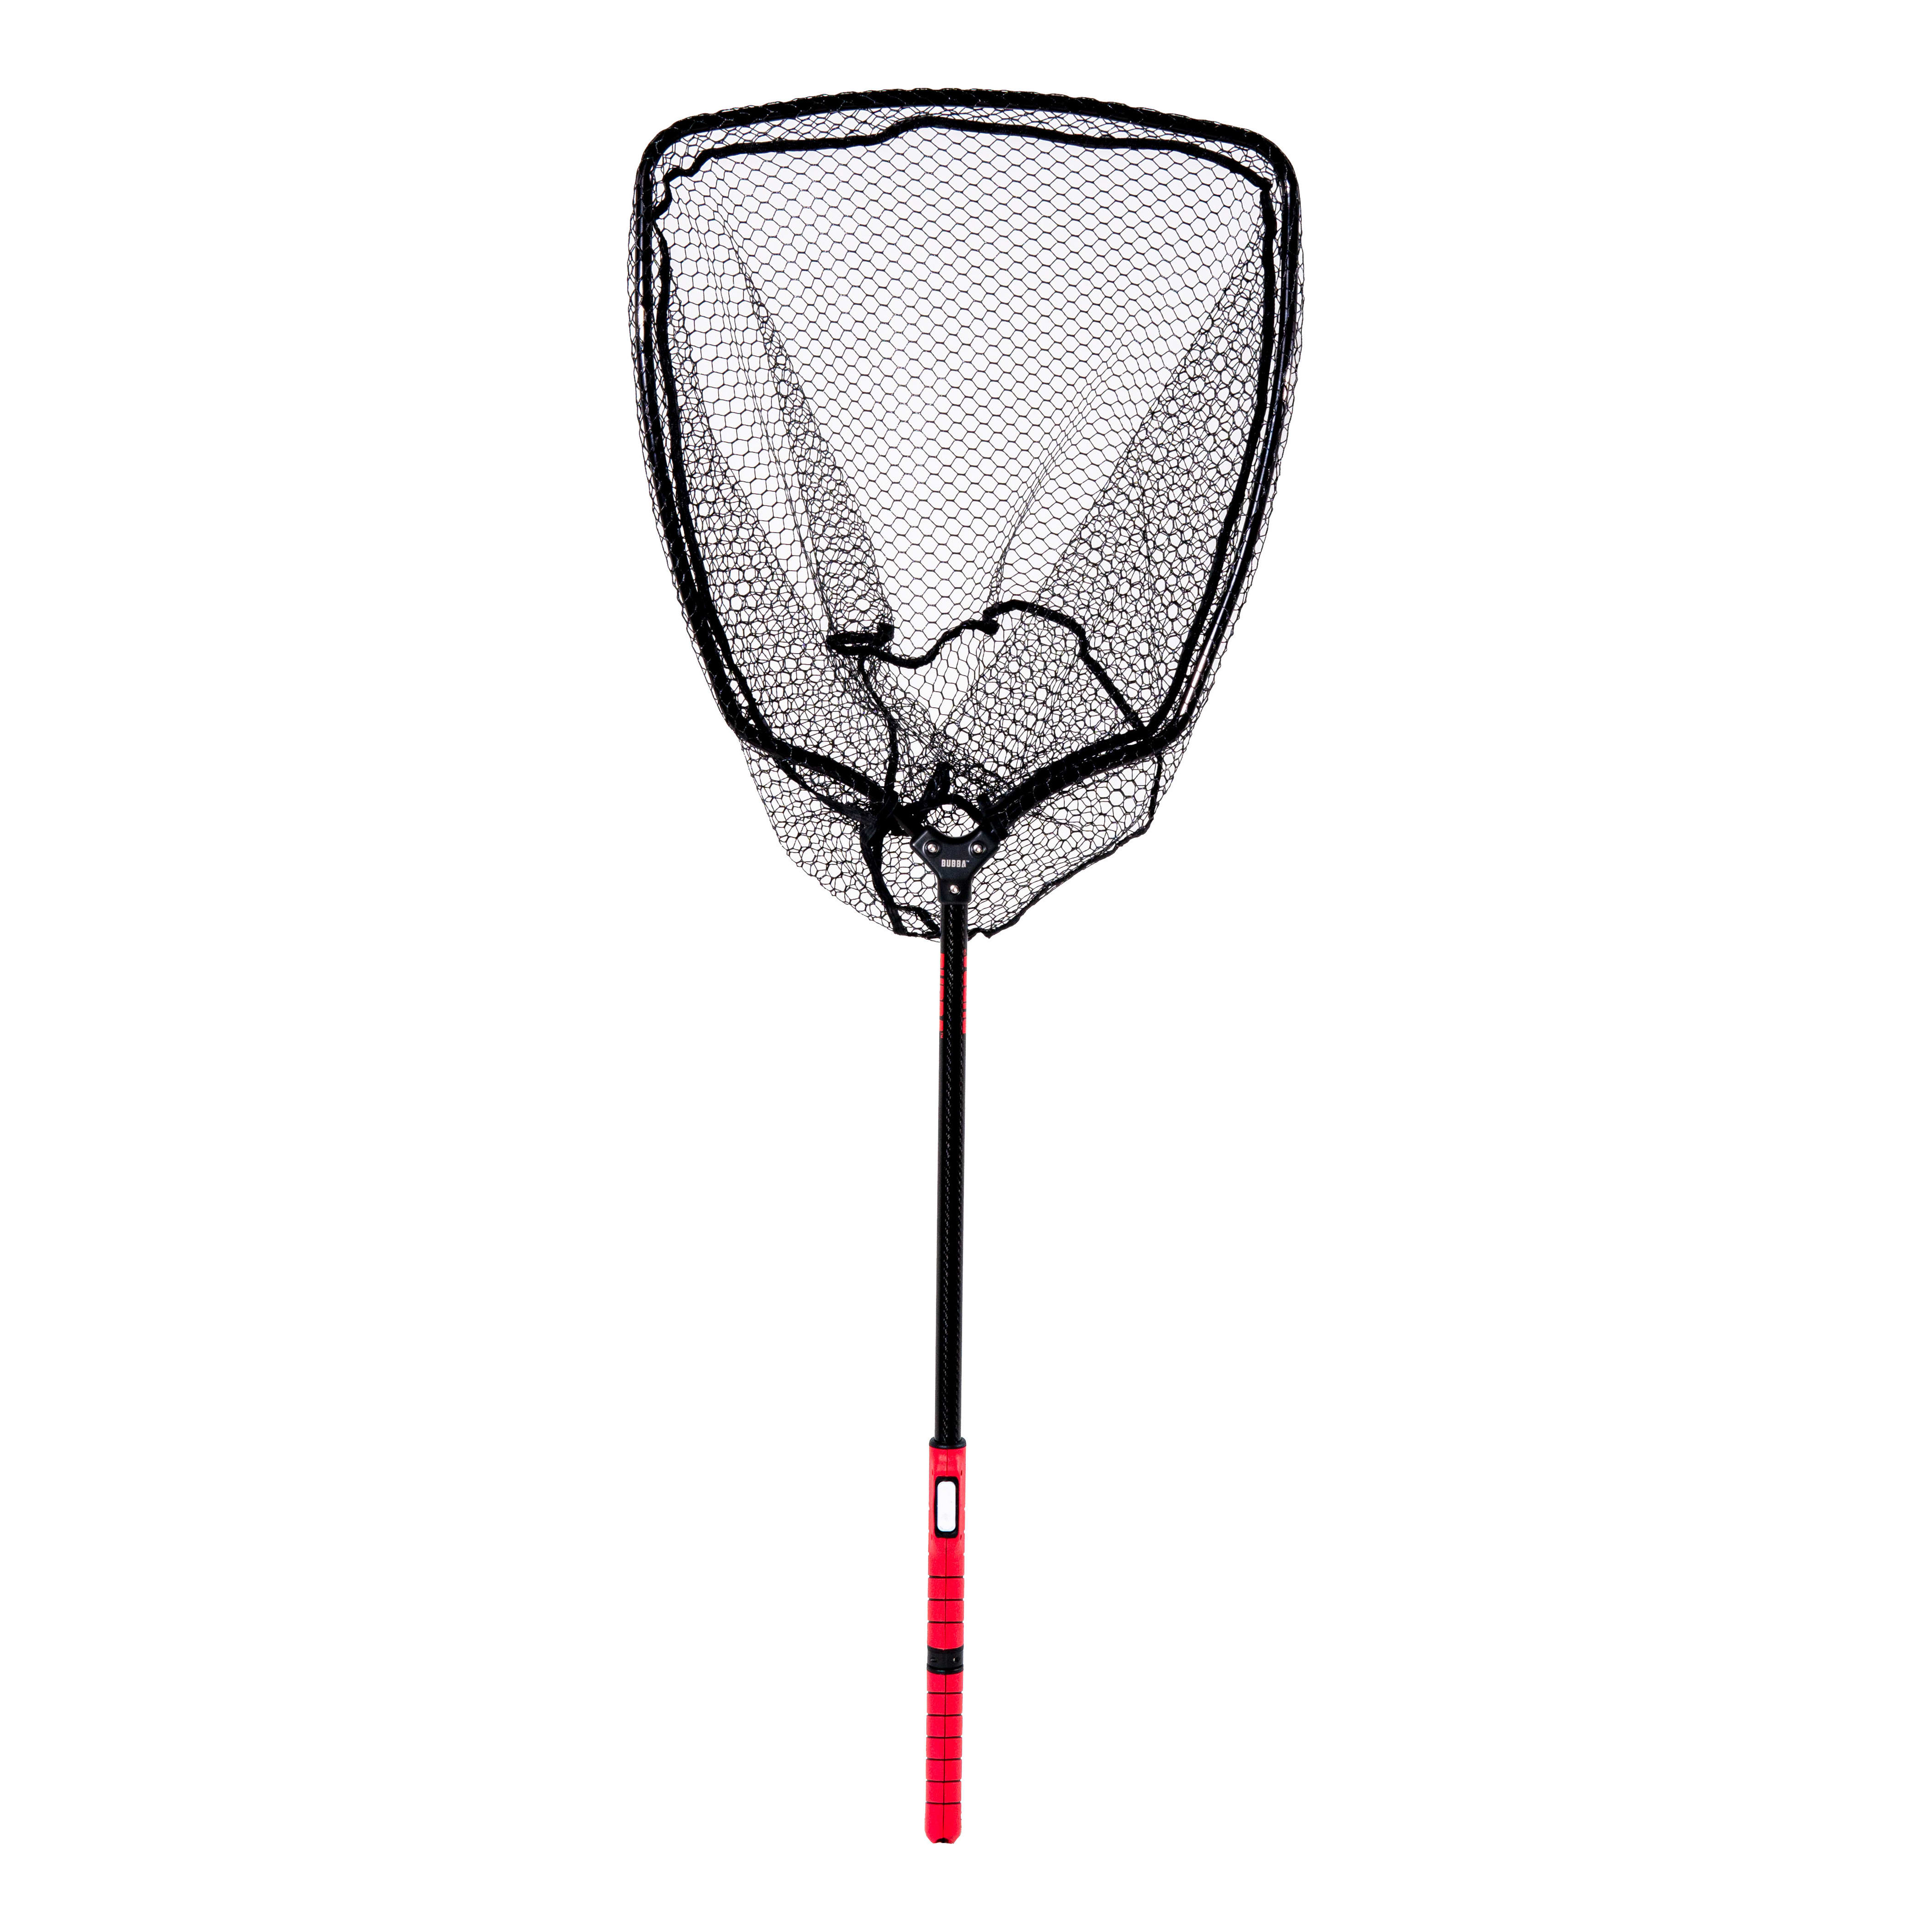 42 (Depth) Tangle Free Replacement Net Bag - Lucky Strike Bait Works Ltd.  Lucky Strike Bait Works Ltd.